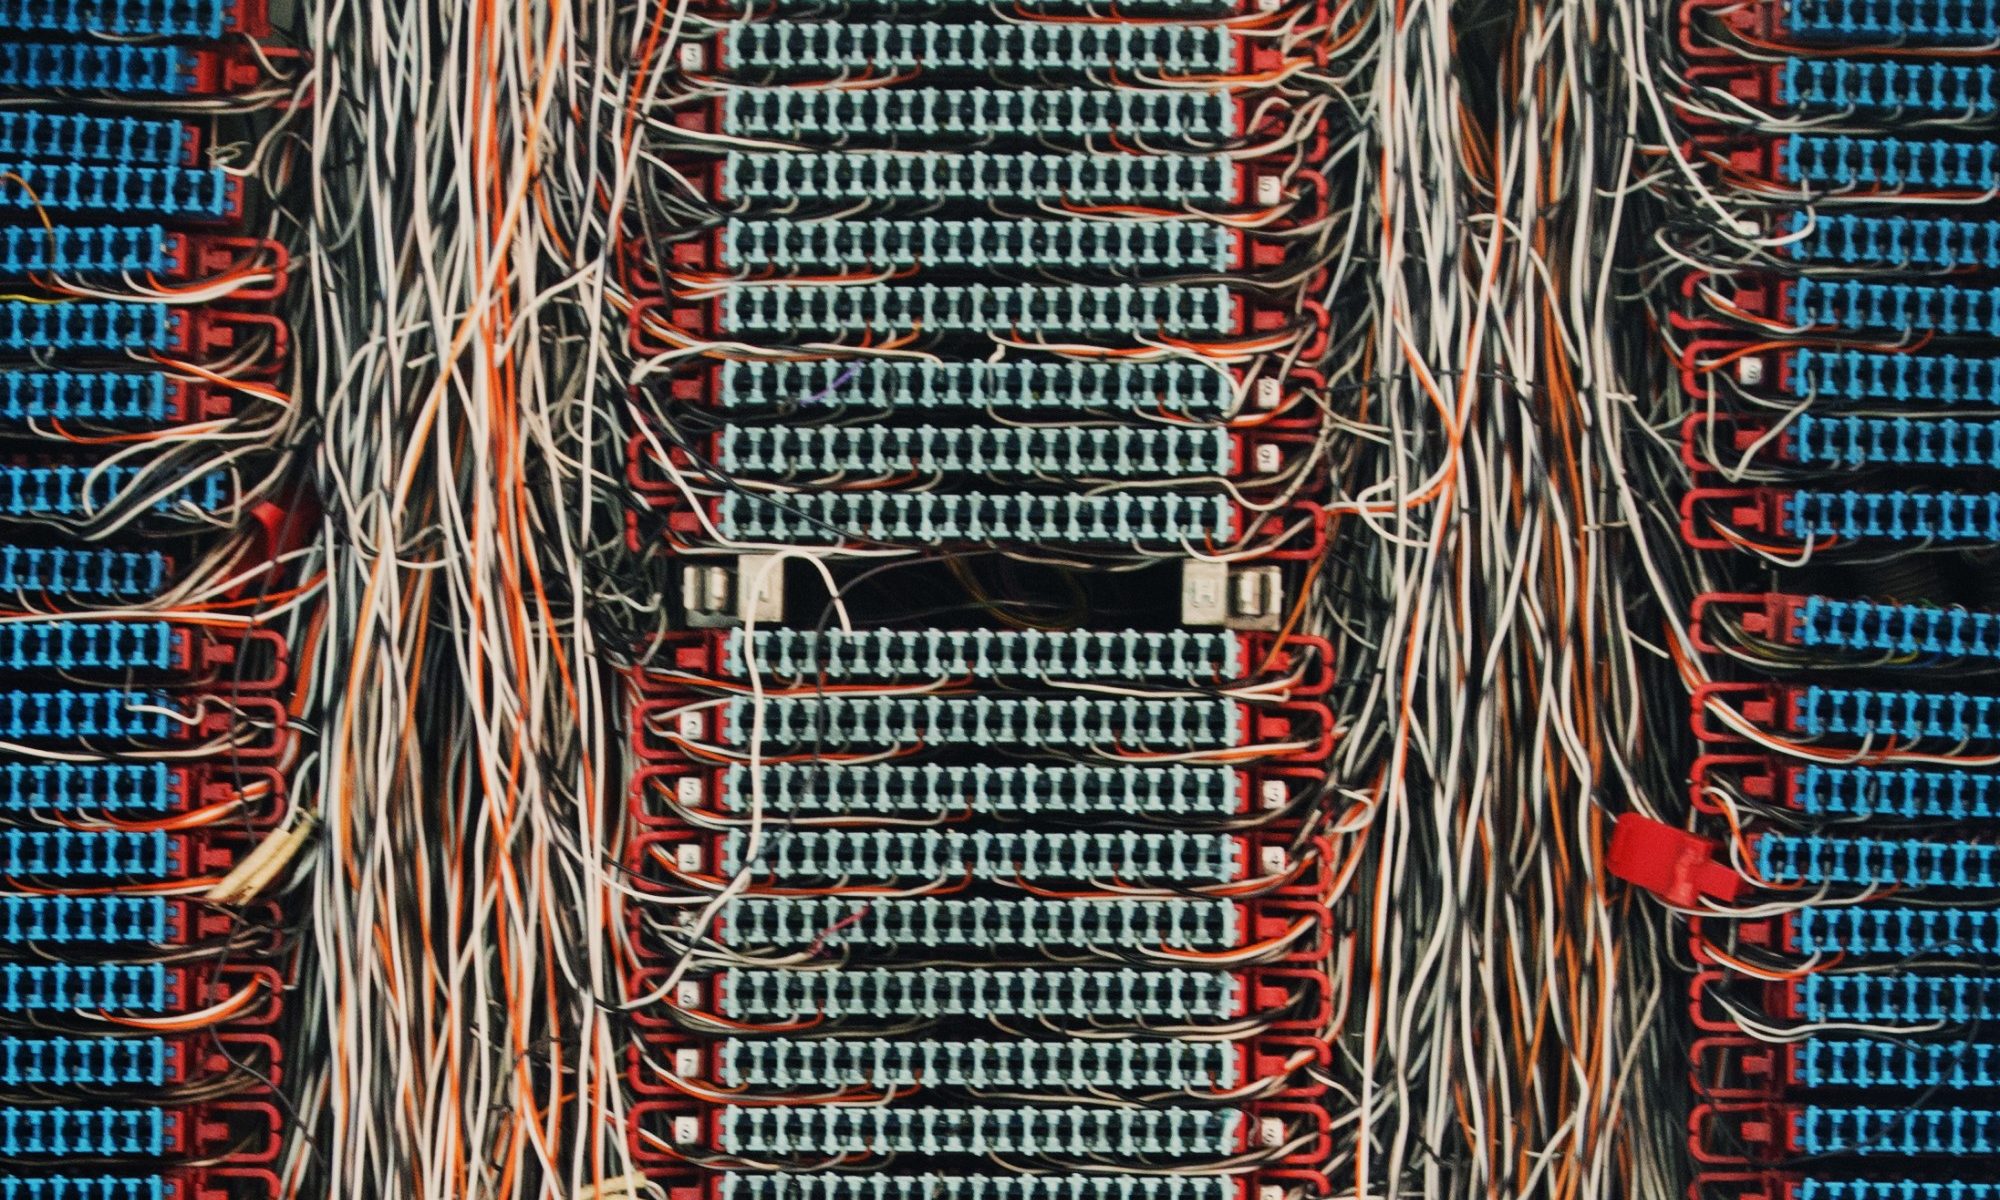 photograph of cluttered telephone switchboard